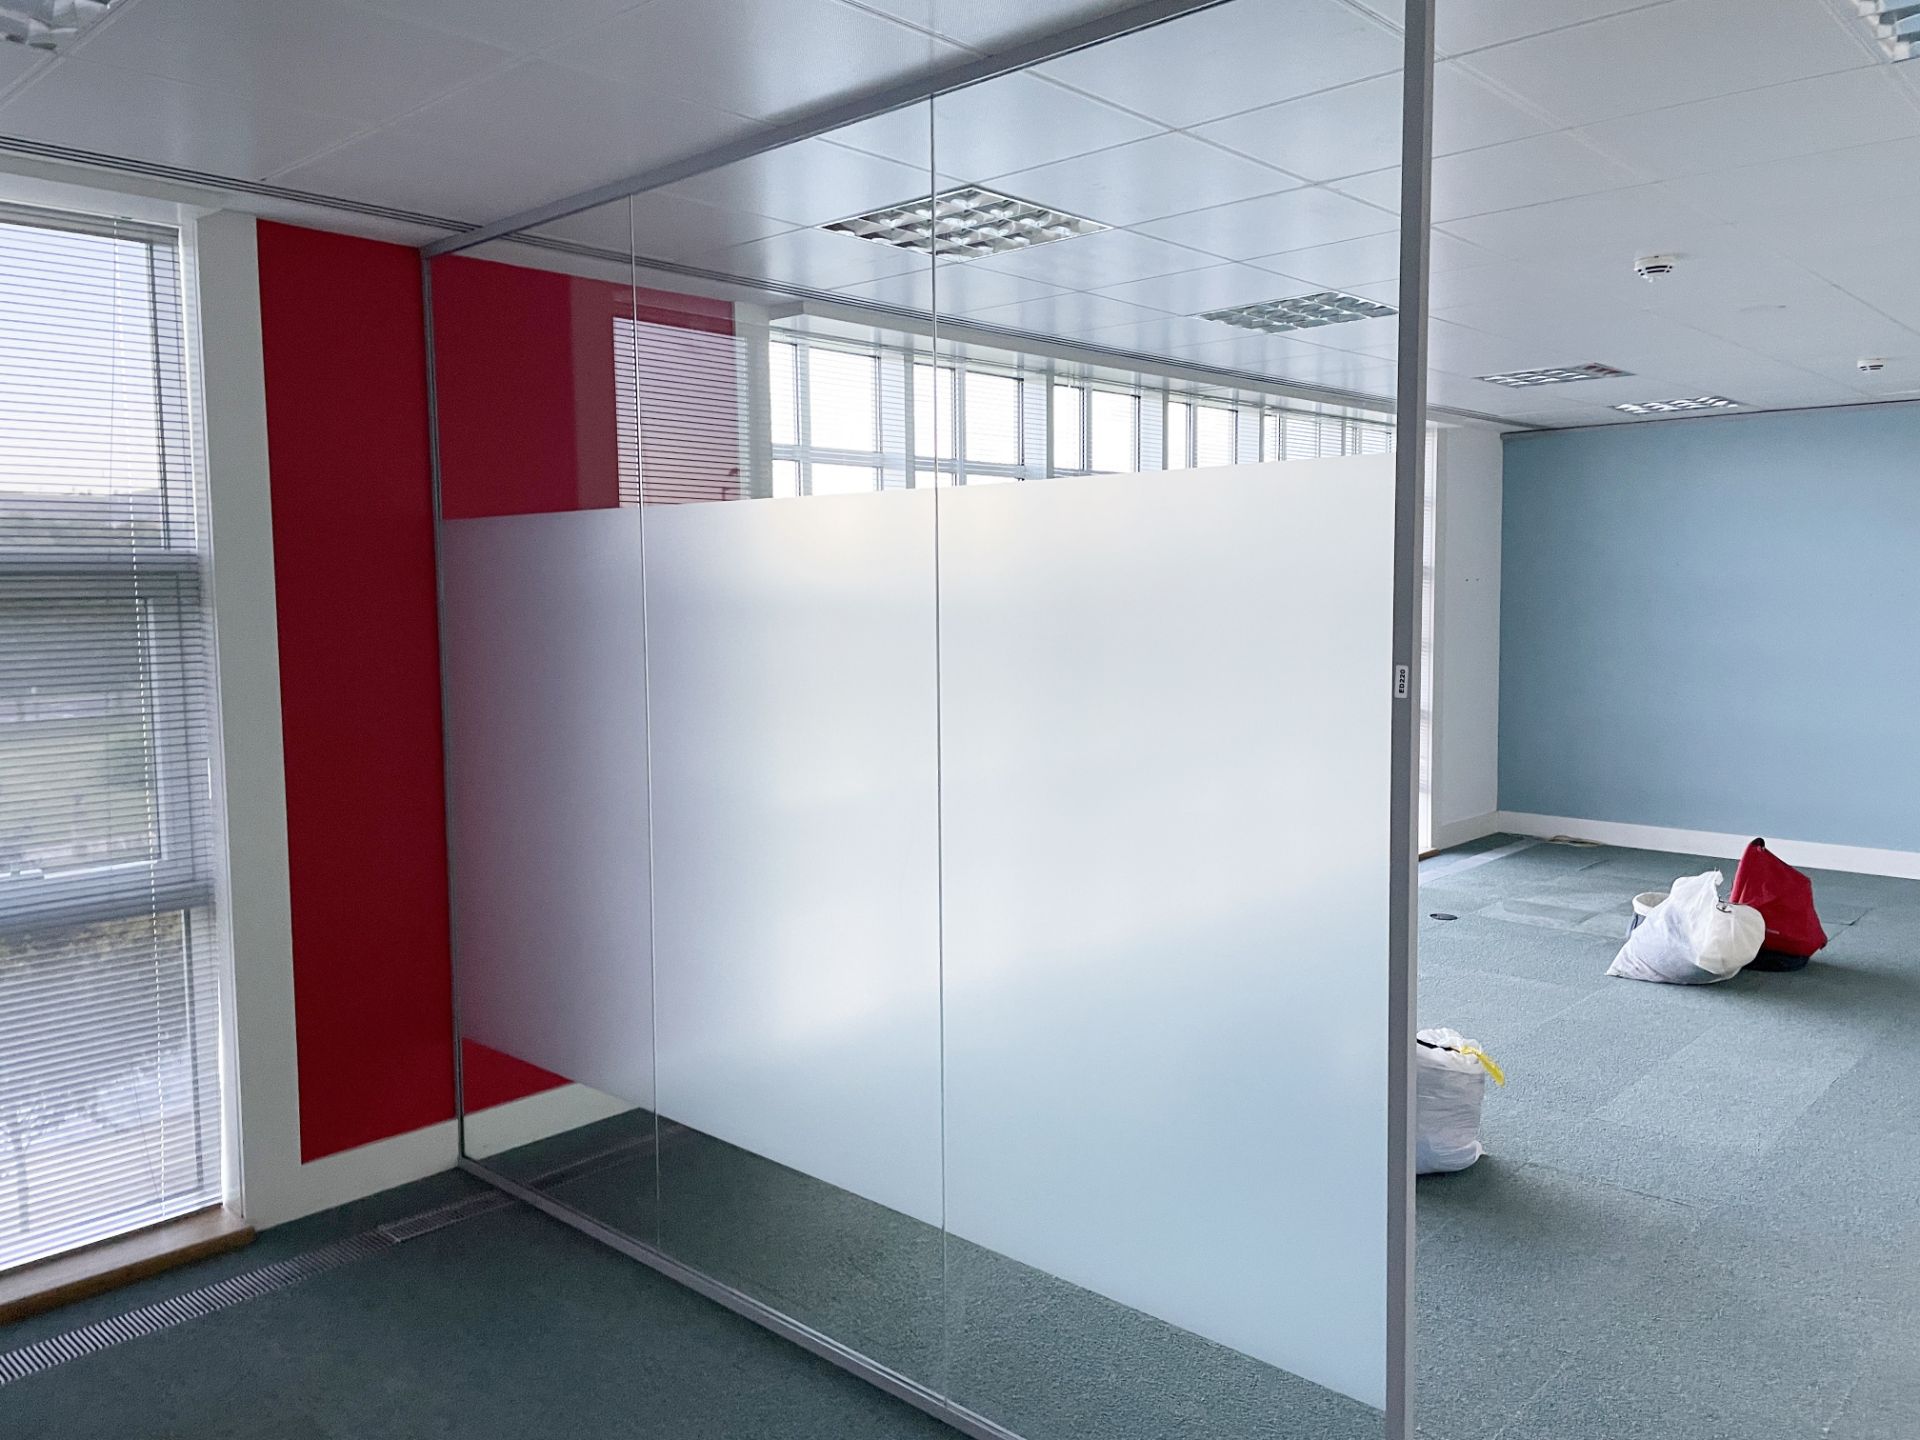 3 x Glass Partiton Panels With Frosted Midsections - Currently Covering An Area Of 3 Metres Across